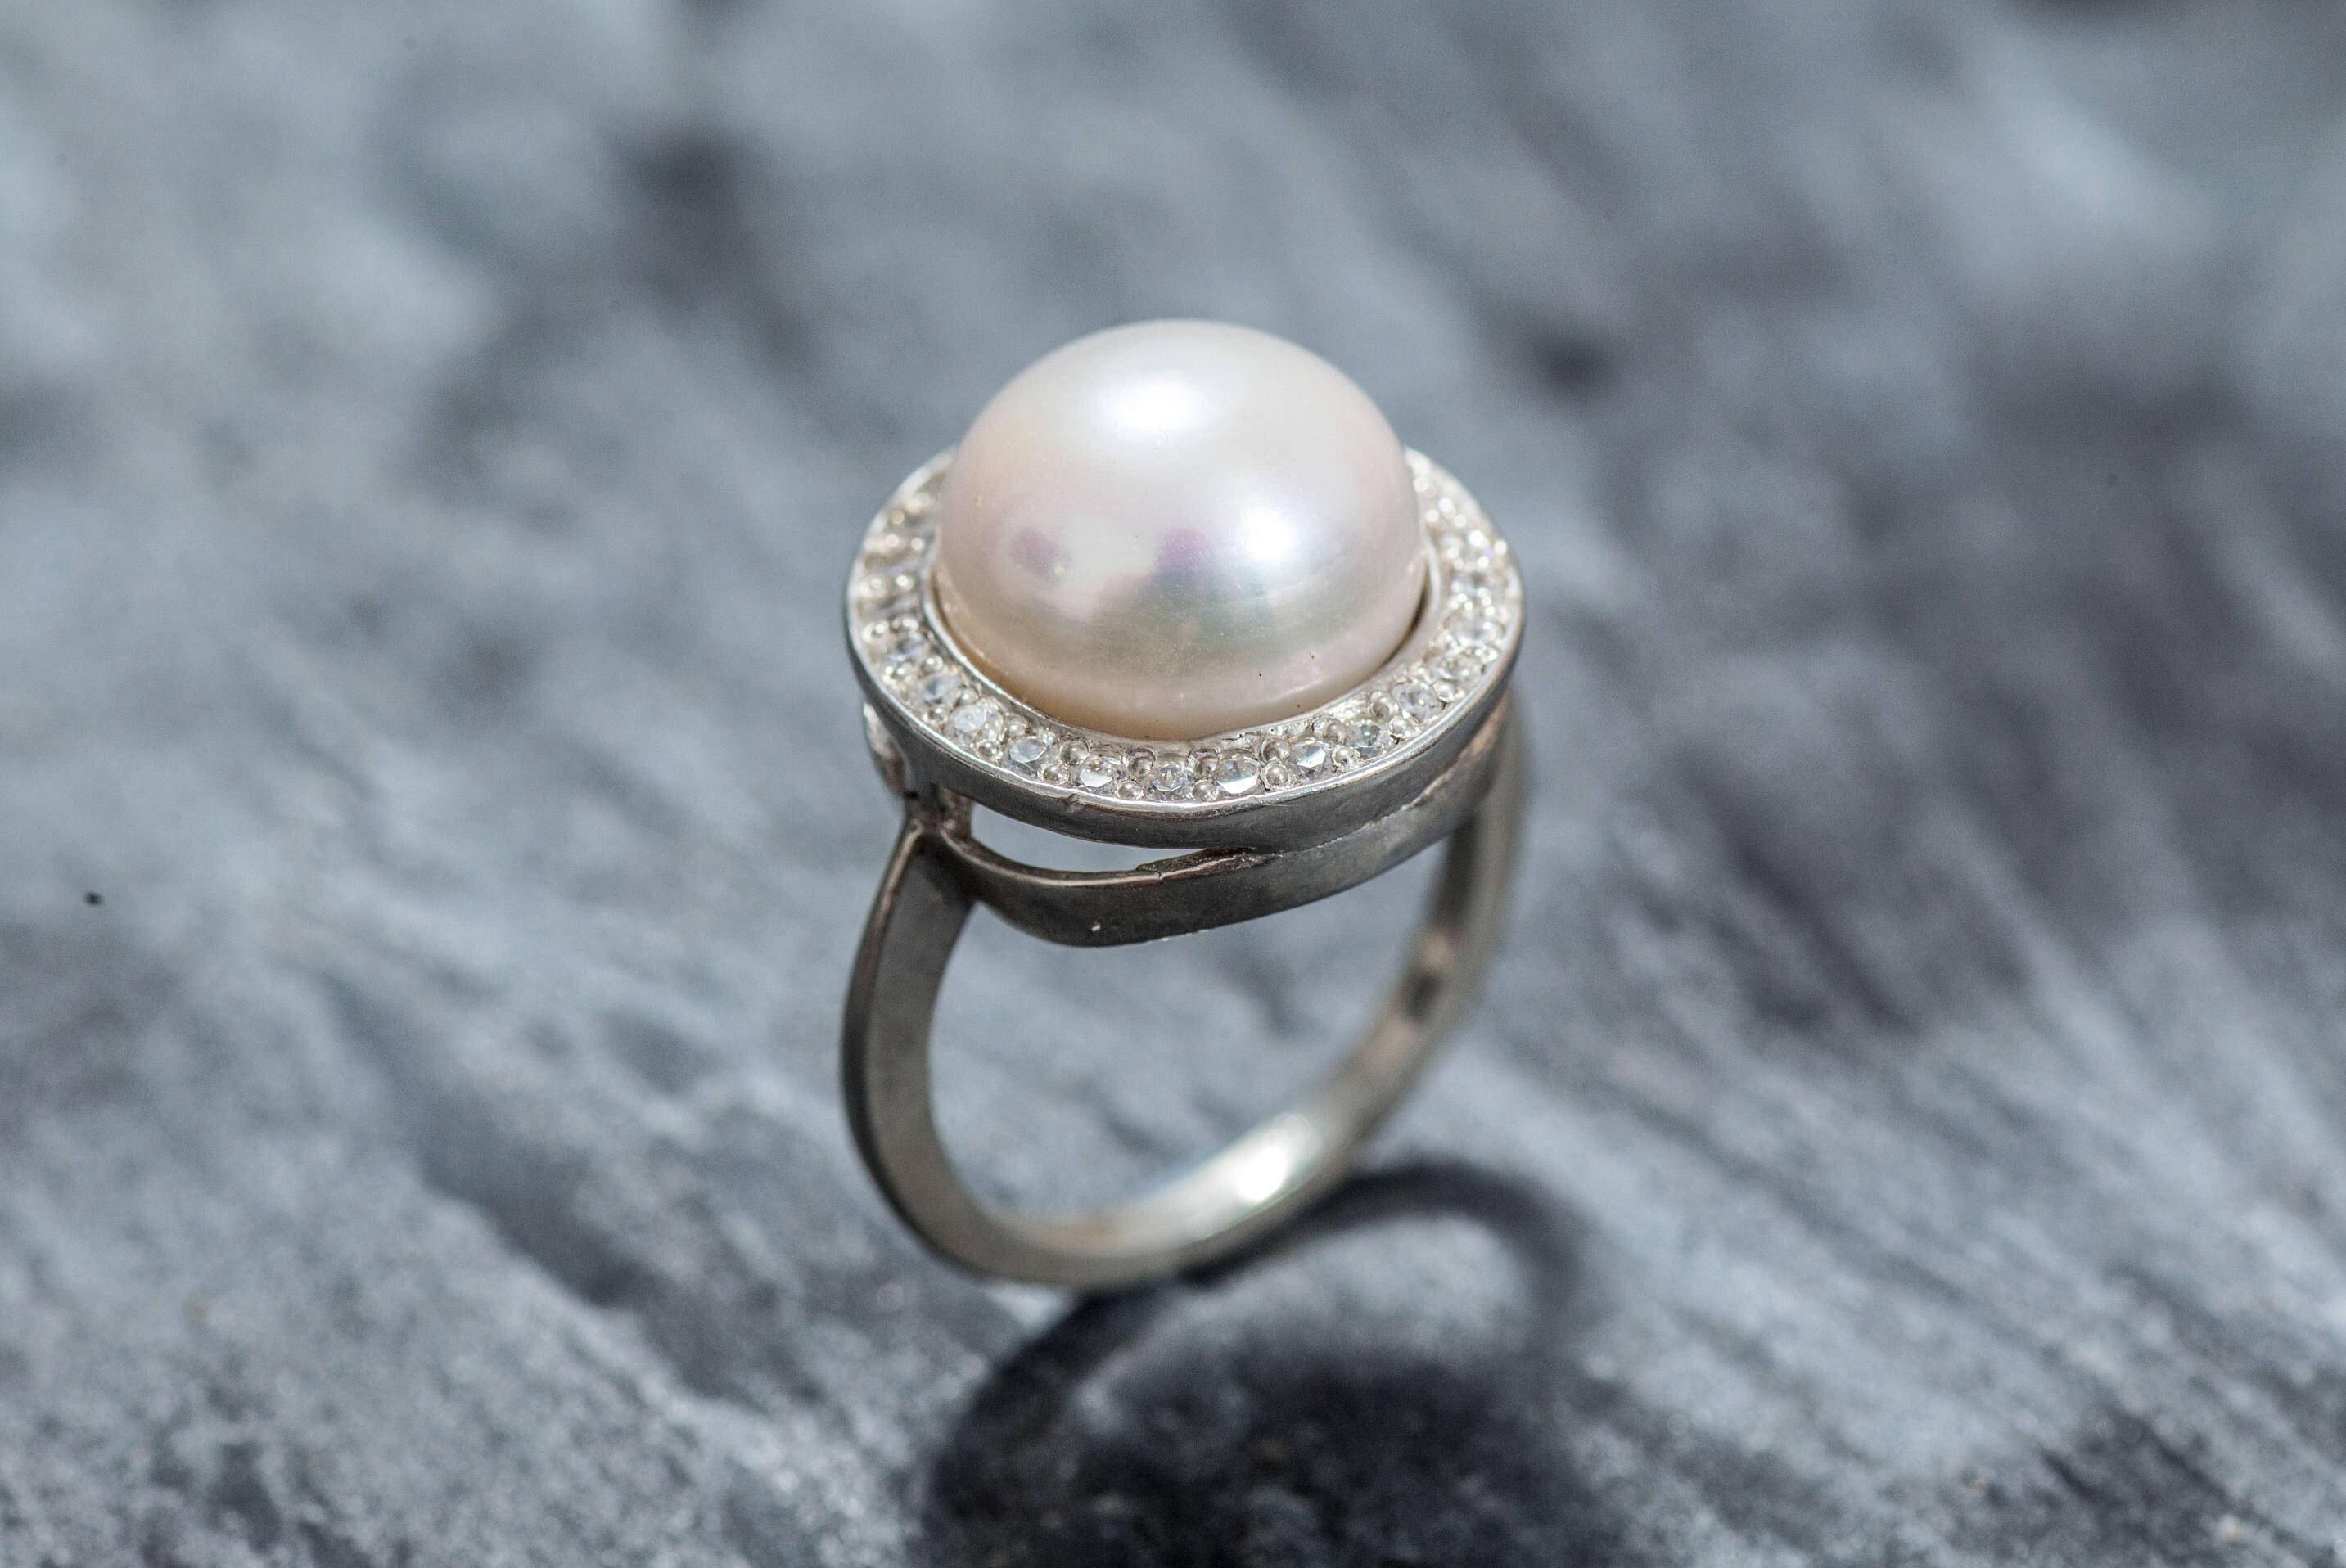 White Pearl Ring, Natural Pearl Ring, Pearl Ring, Large Pearl Ring, Vintage Pearl Ring, June Birthstone, June Ring, Solid Silver Ring, Pearl